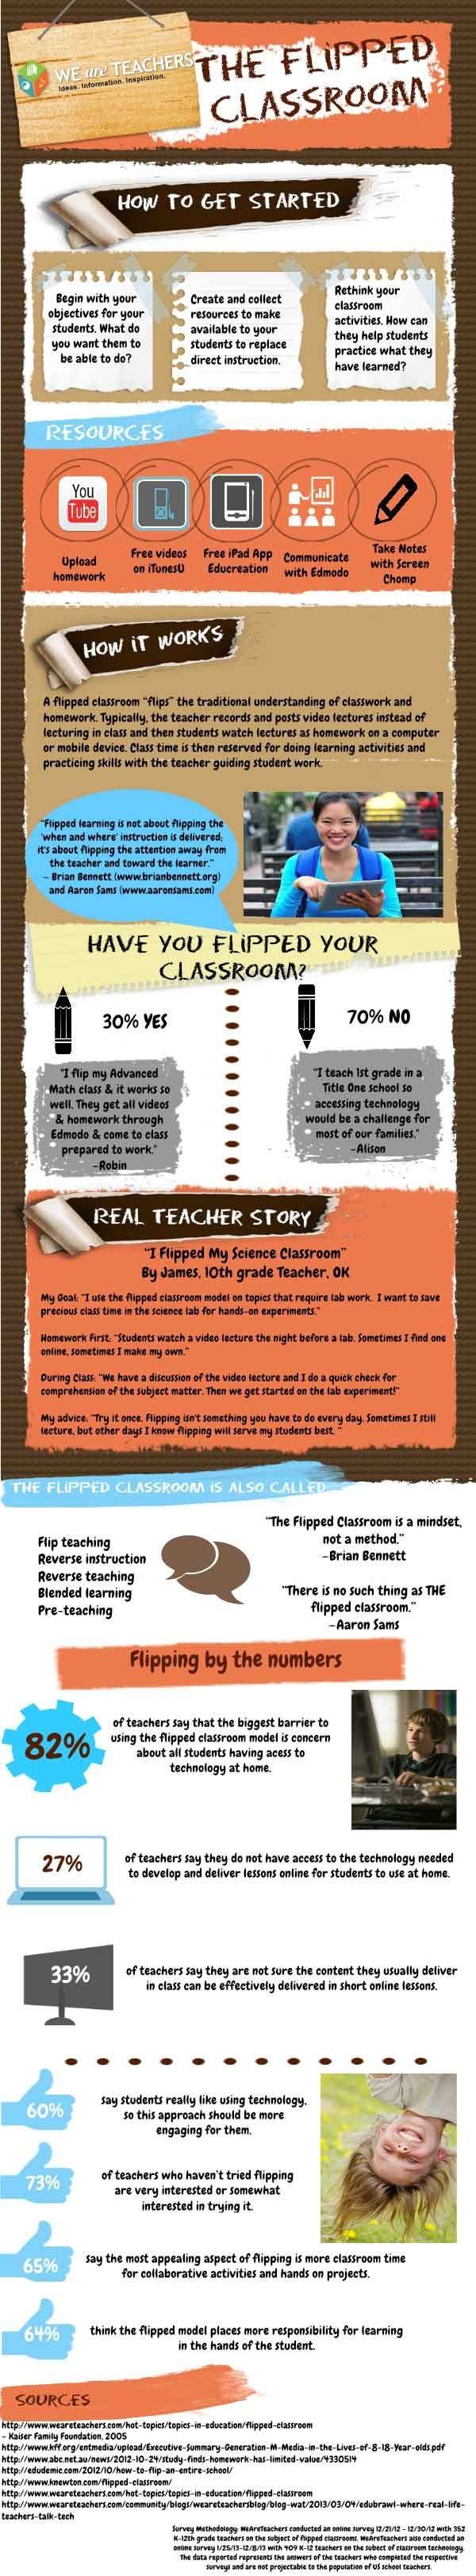 The Flipped Classroom Infographic thumbnail